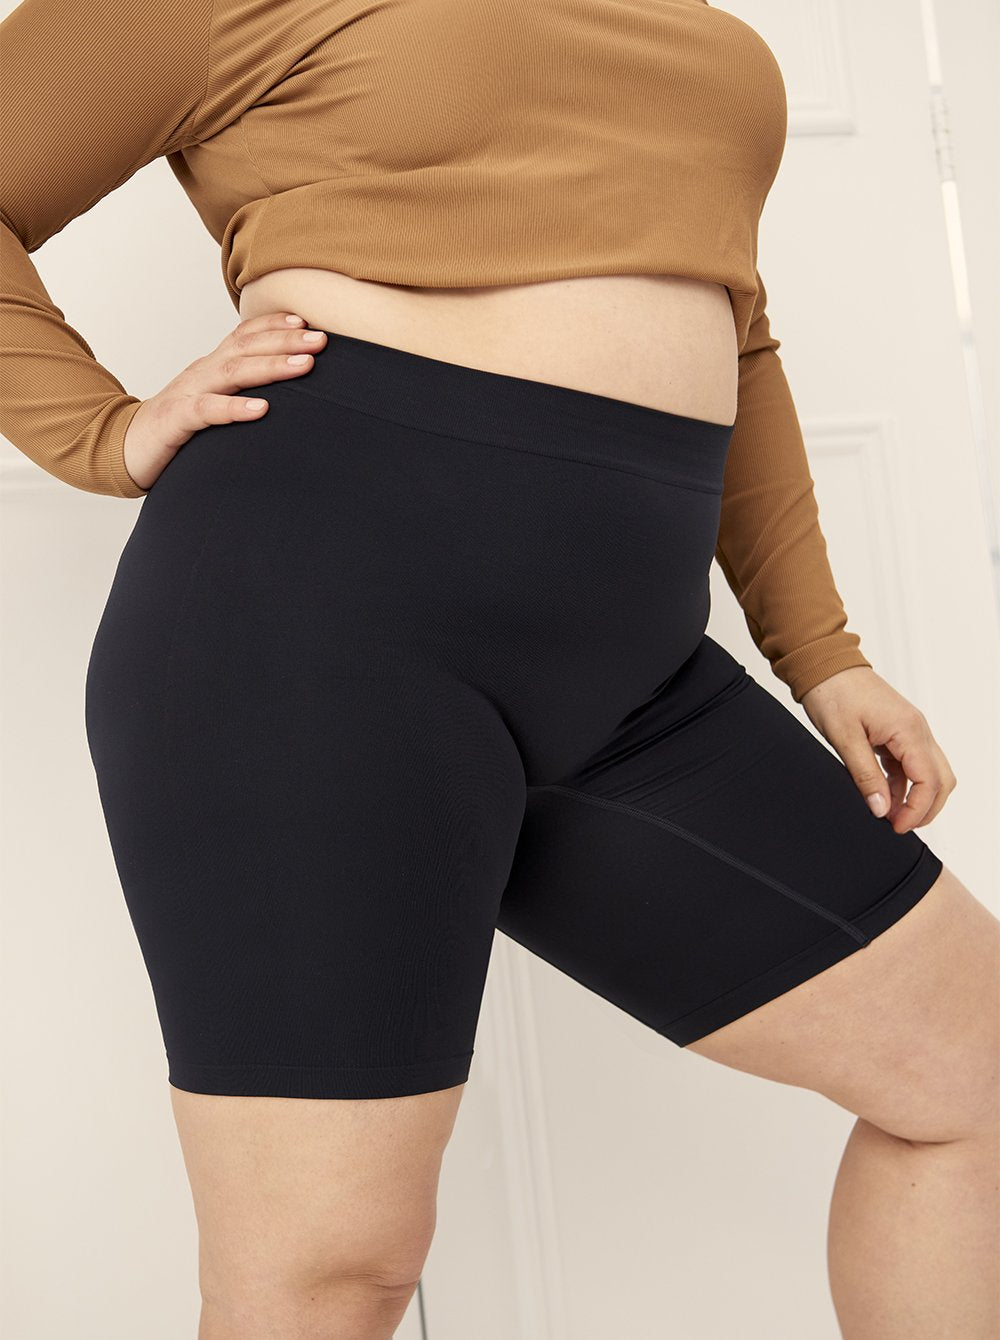 Cable Twist Tights Archives - Thighs the Limit